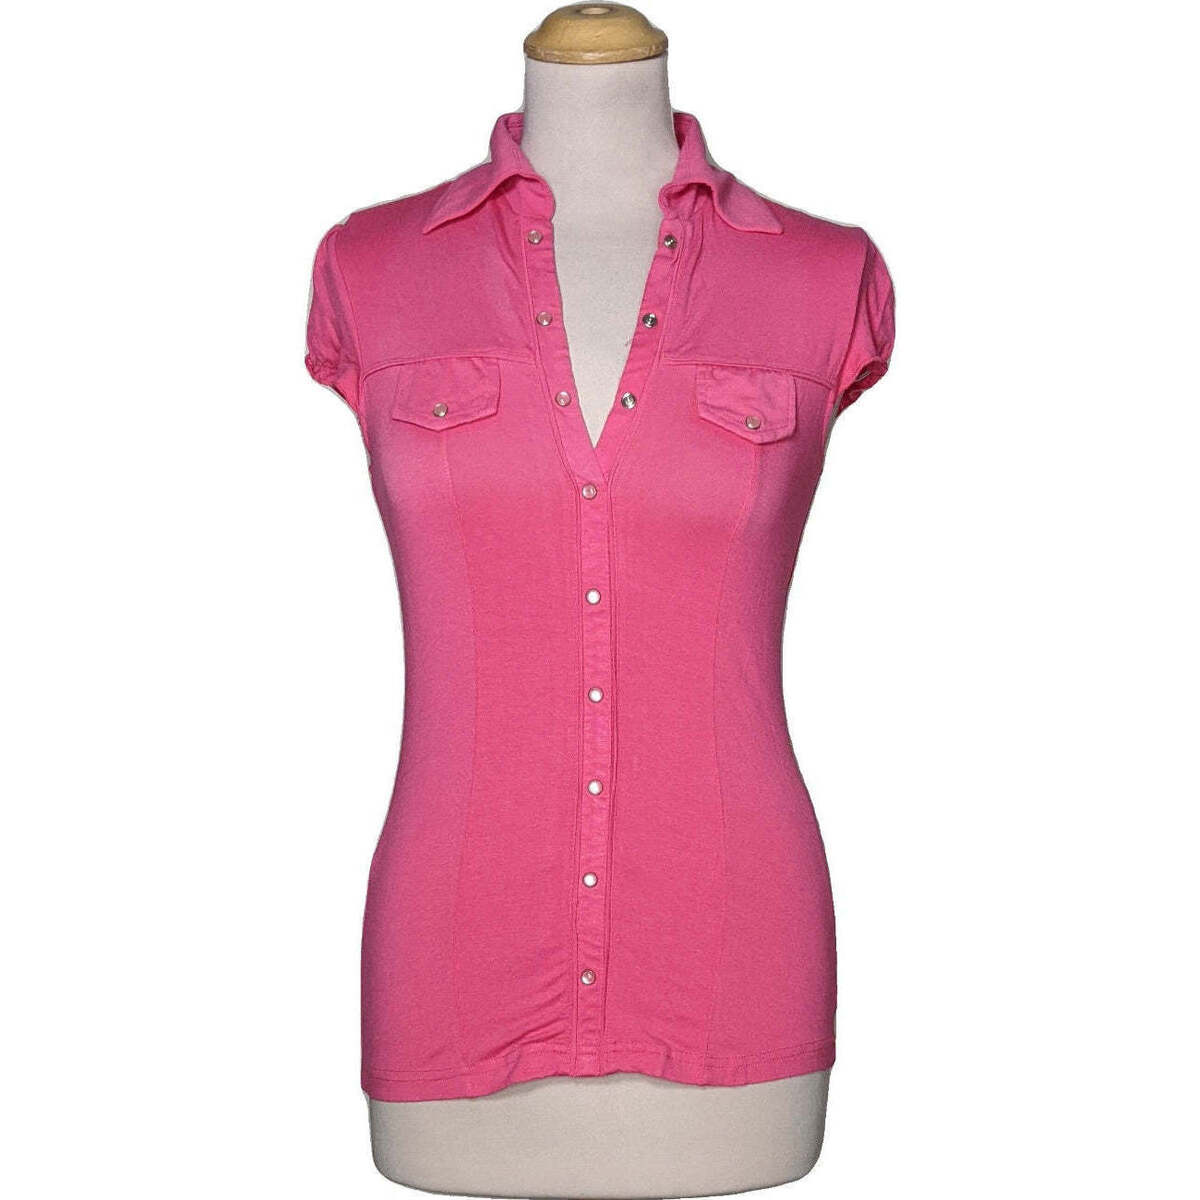 Vêtements Femme T-shirts & Polos Xanaka top manches courtes  36 - T1 - S Rose Rose